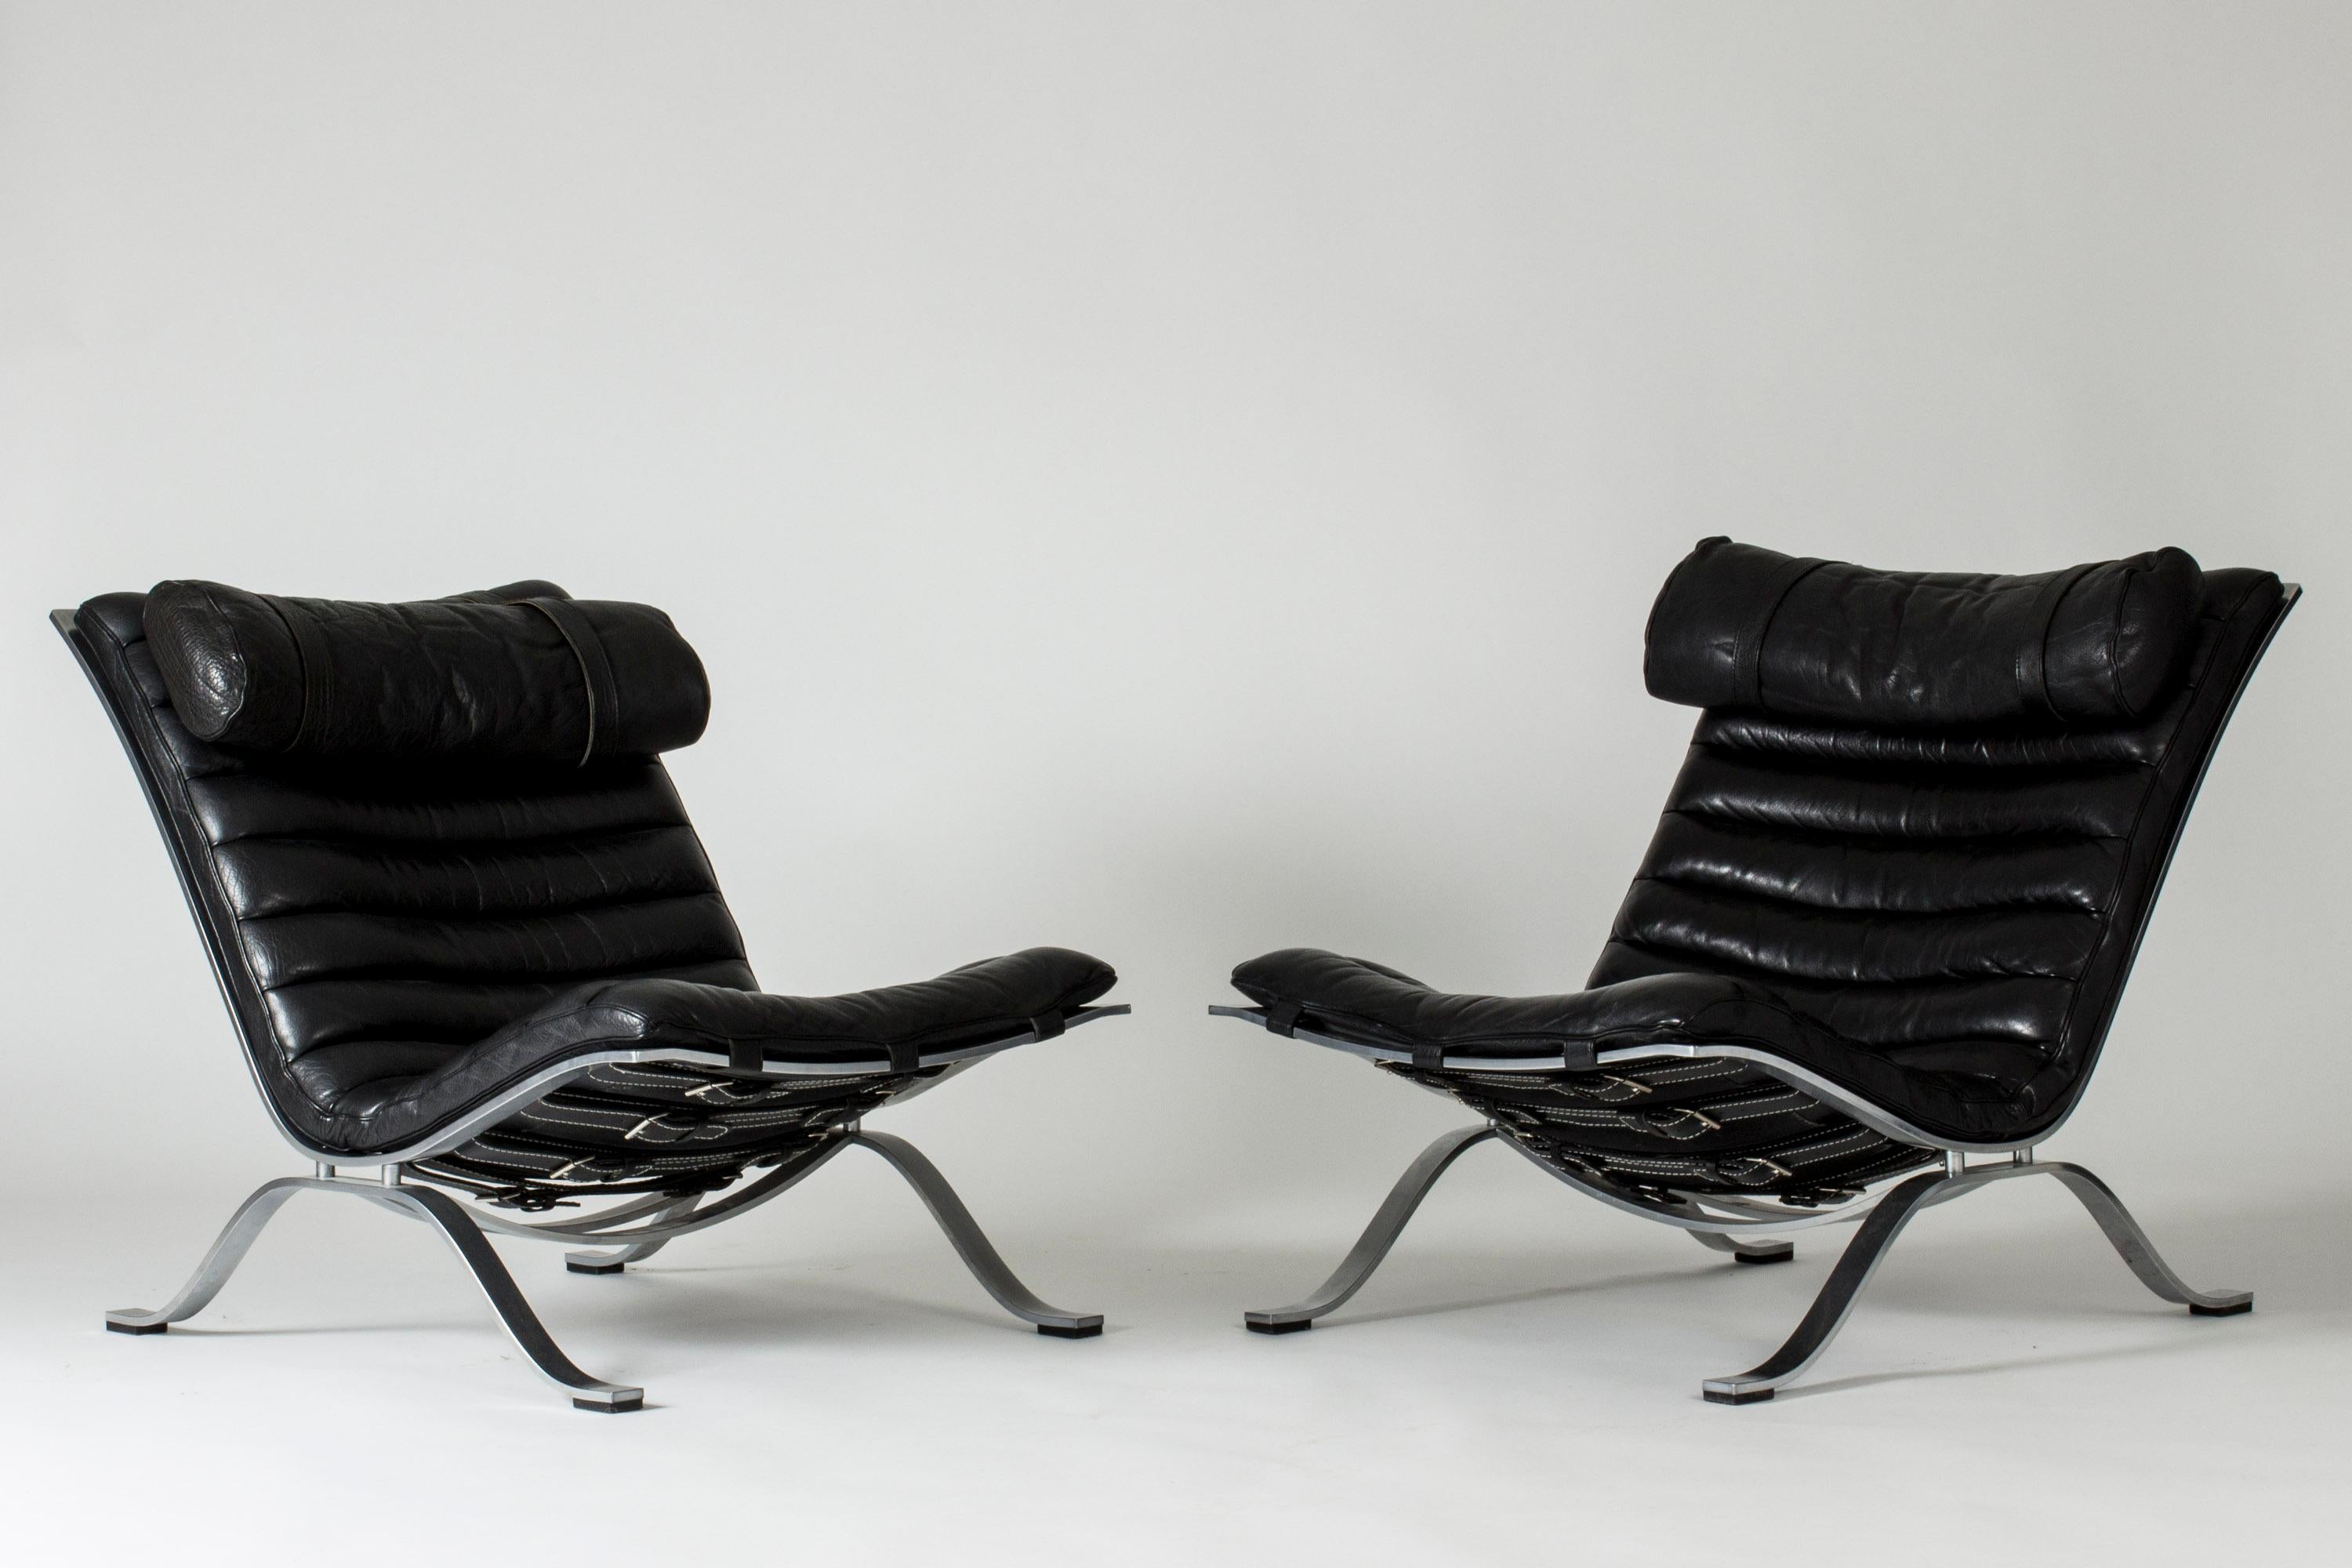 Pair of cool and comfortable “Ari” lounge chairs by Arne Norell, made from steel and leather. Beautiful black leather with nice patina.